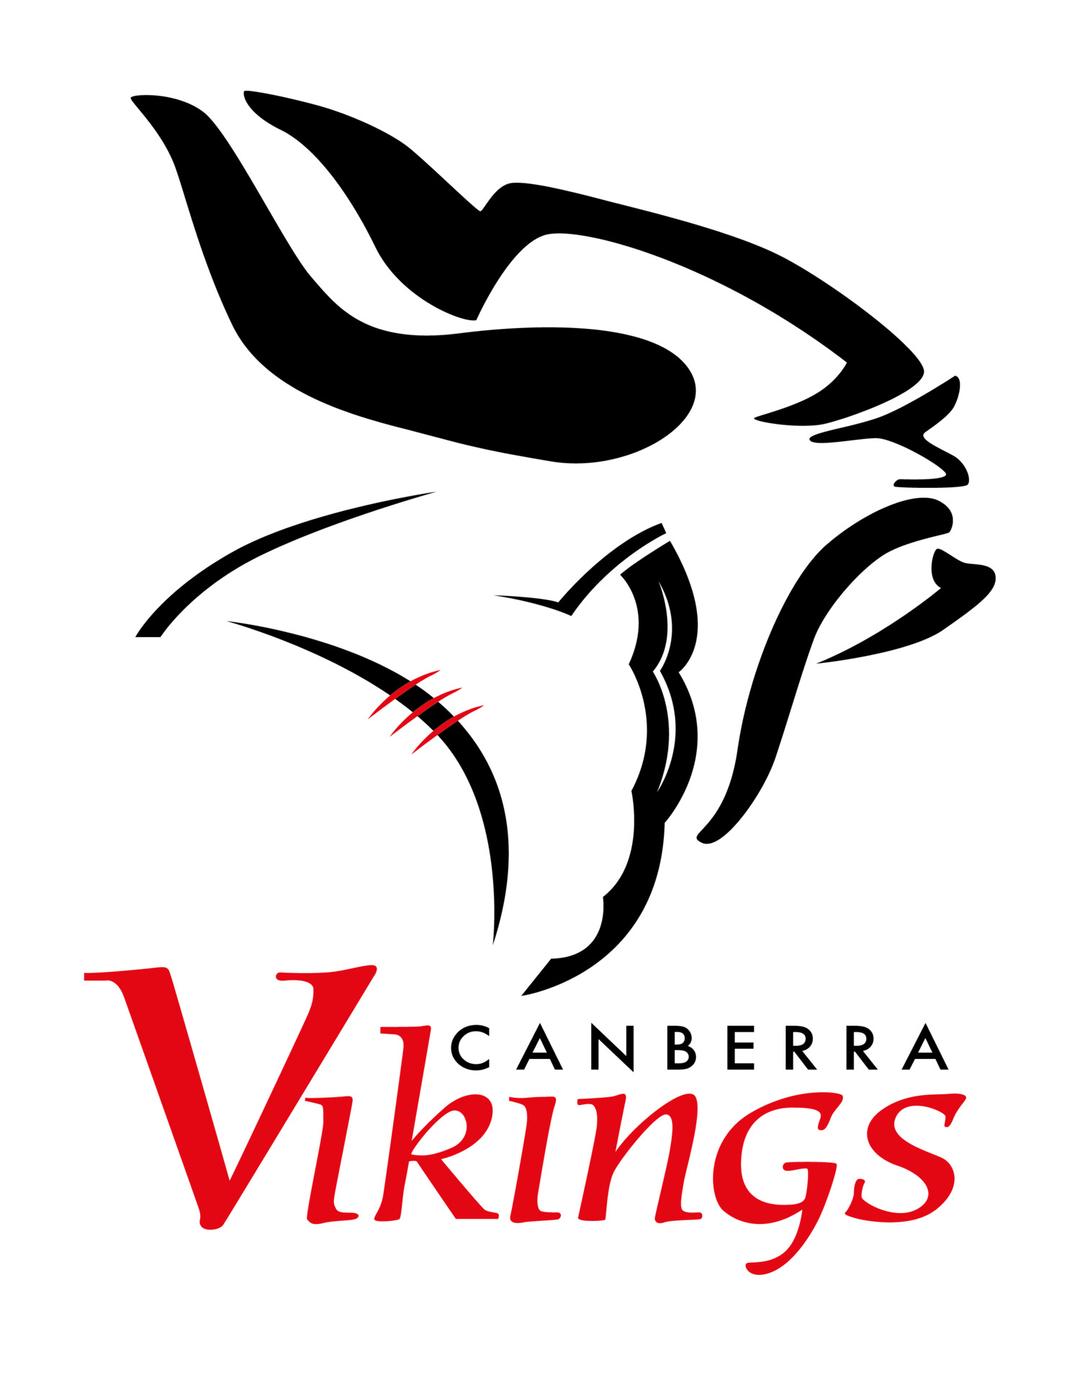 Canberra Vikings Rugby Logo png transparent